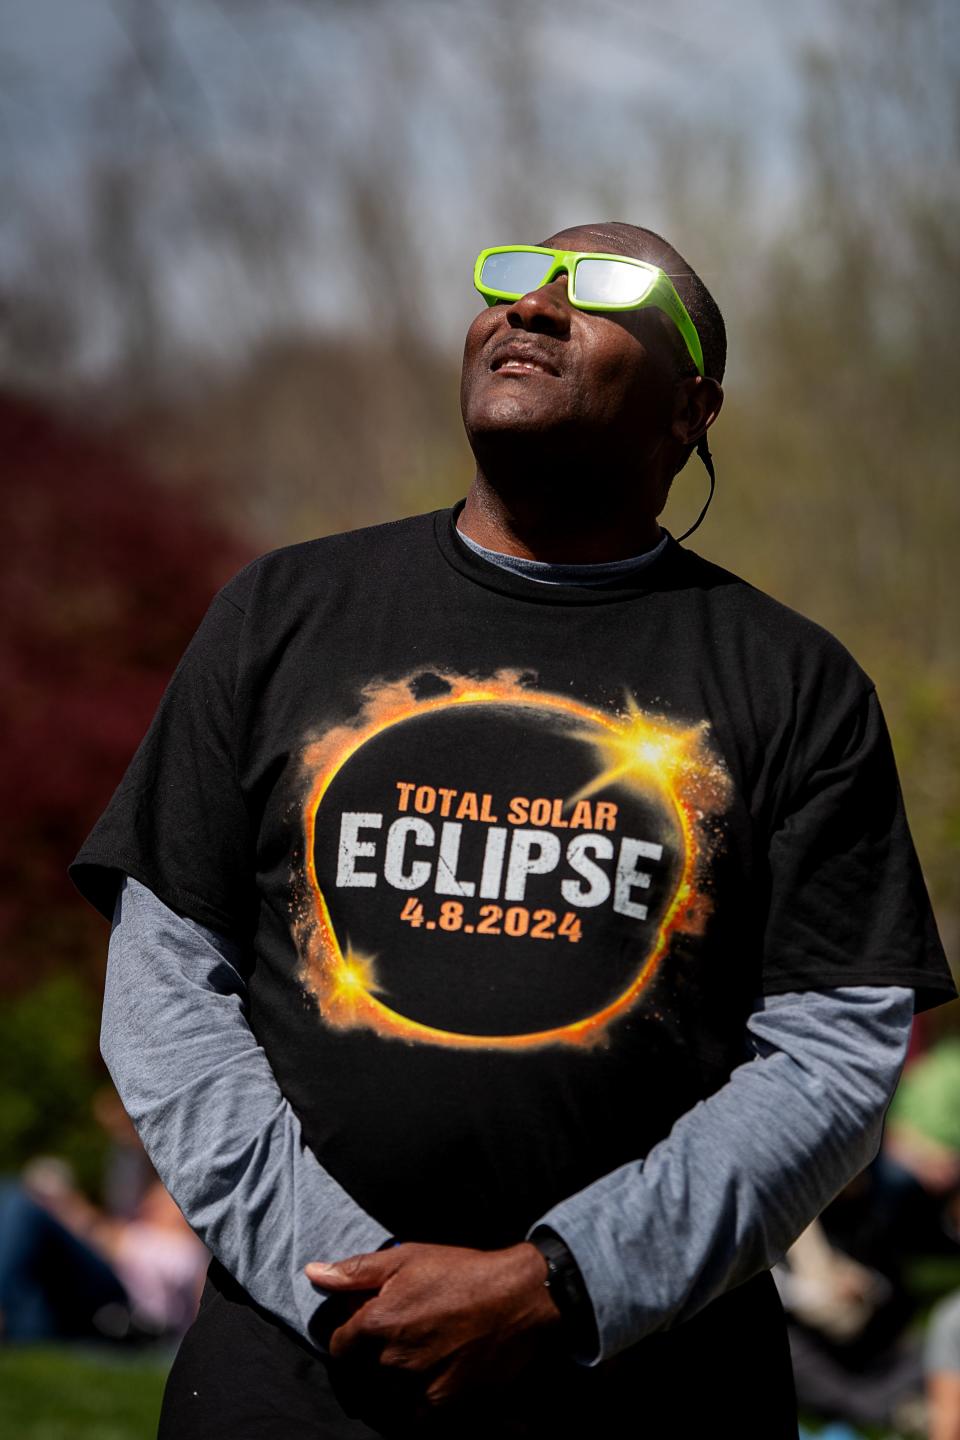 James Dixon takes in the solar eclipse, April 8, 2024. Dixon traveled from Spring Lake, near Fayetteville, to see the phenomenon in Asheville. “Maybe our grandkids will take us to the next one in 2044,” said Dixon.